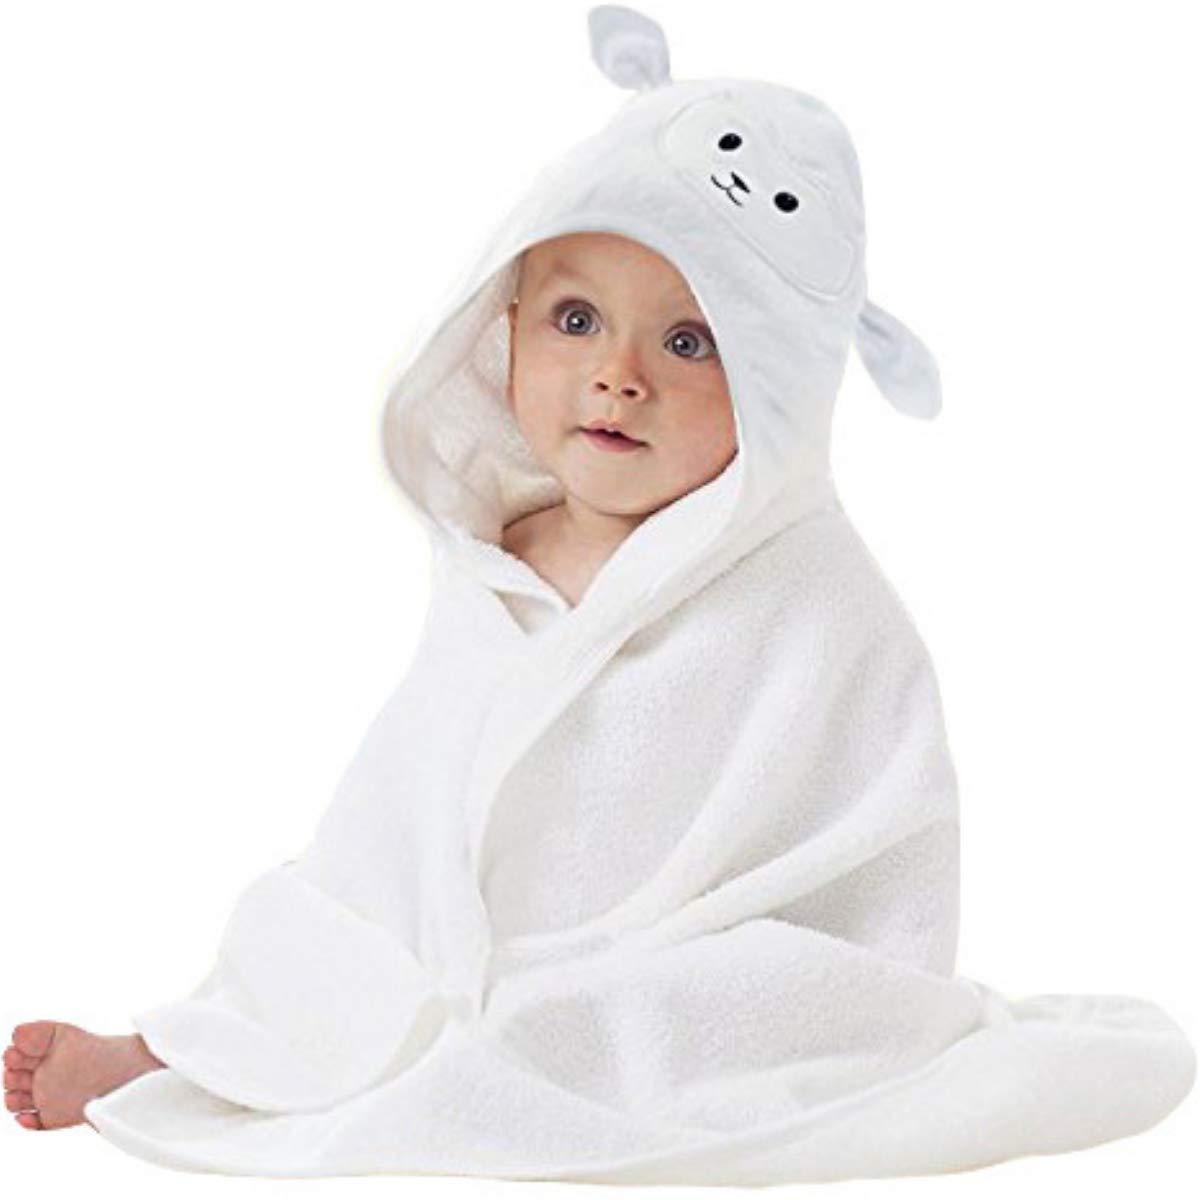 High Quality High Quality Microfiber Sports Towel - Luxury New Design Wholesale Bath Towels bamboo fiber Quick-Dry Kids Hooded For Children Towel BT1 – Honest